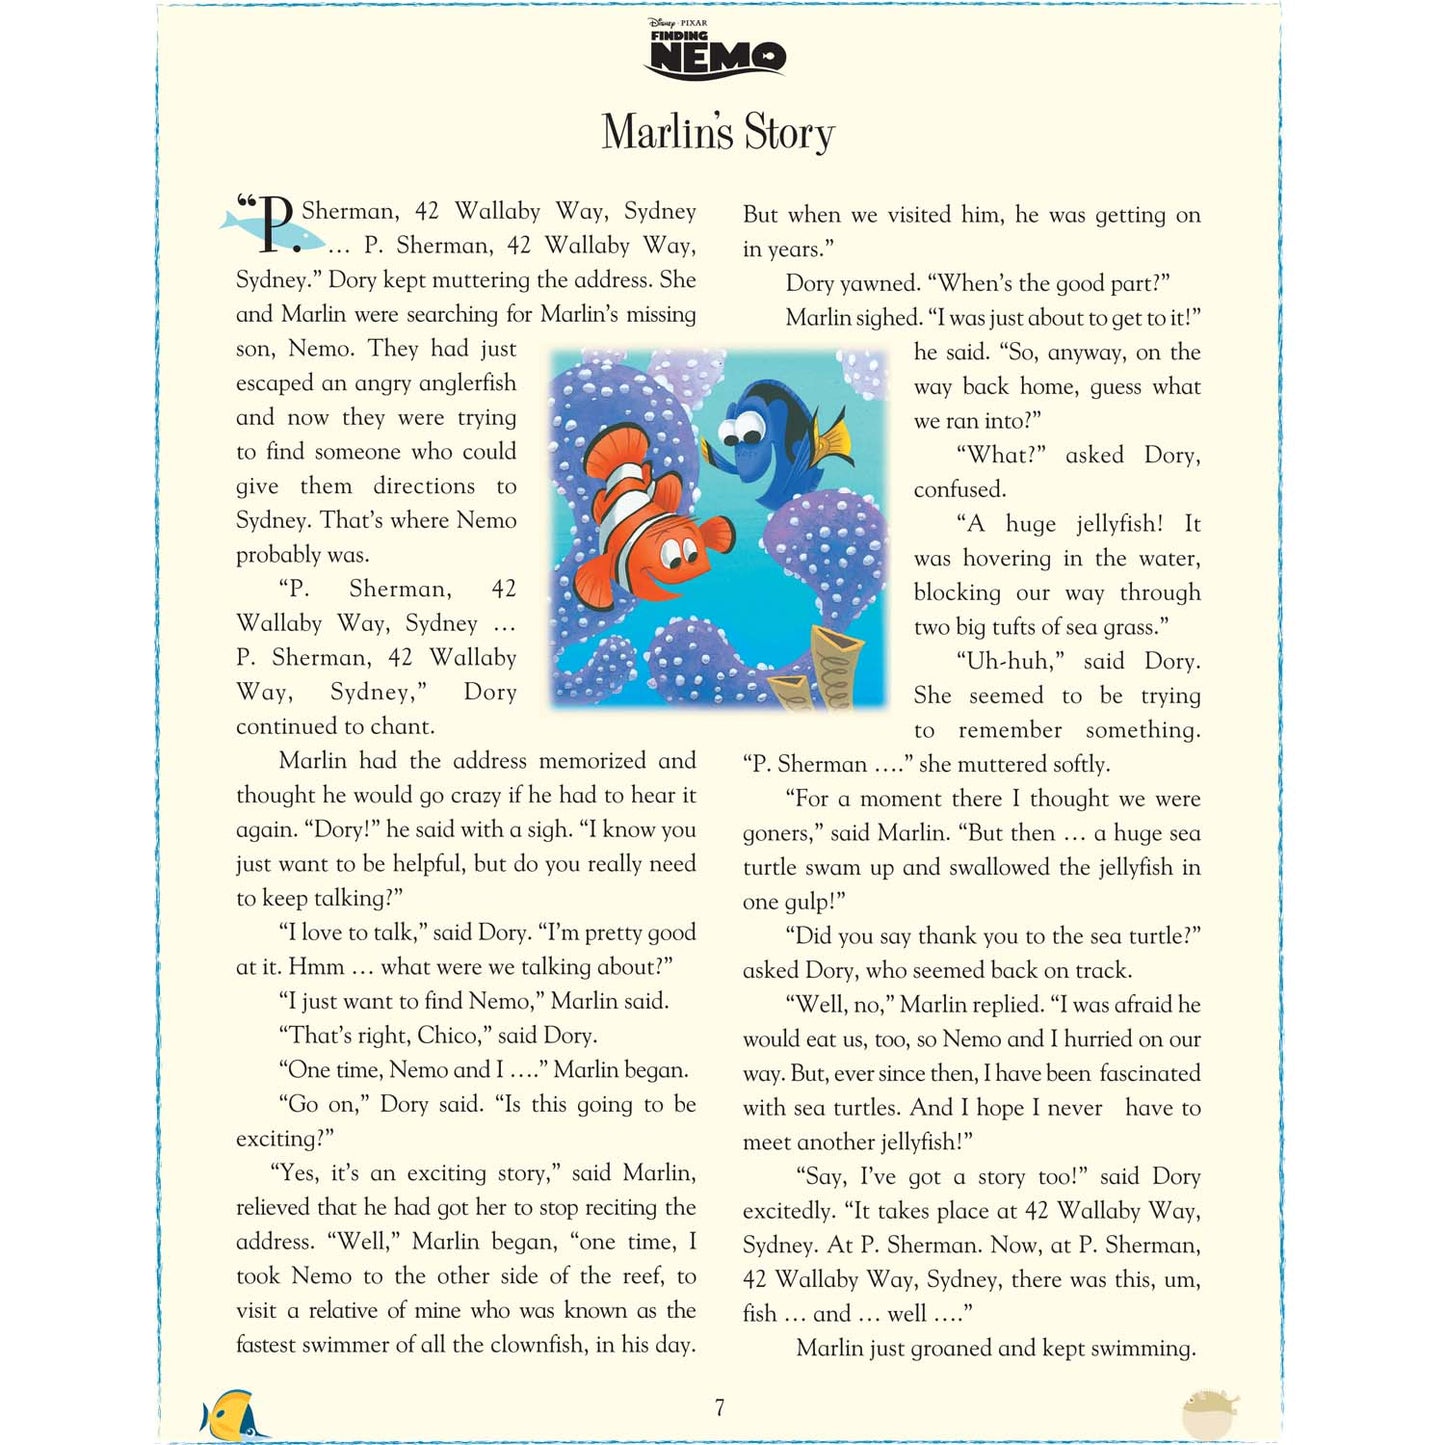 Disney 100 Stories For Boys By Parragon Books